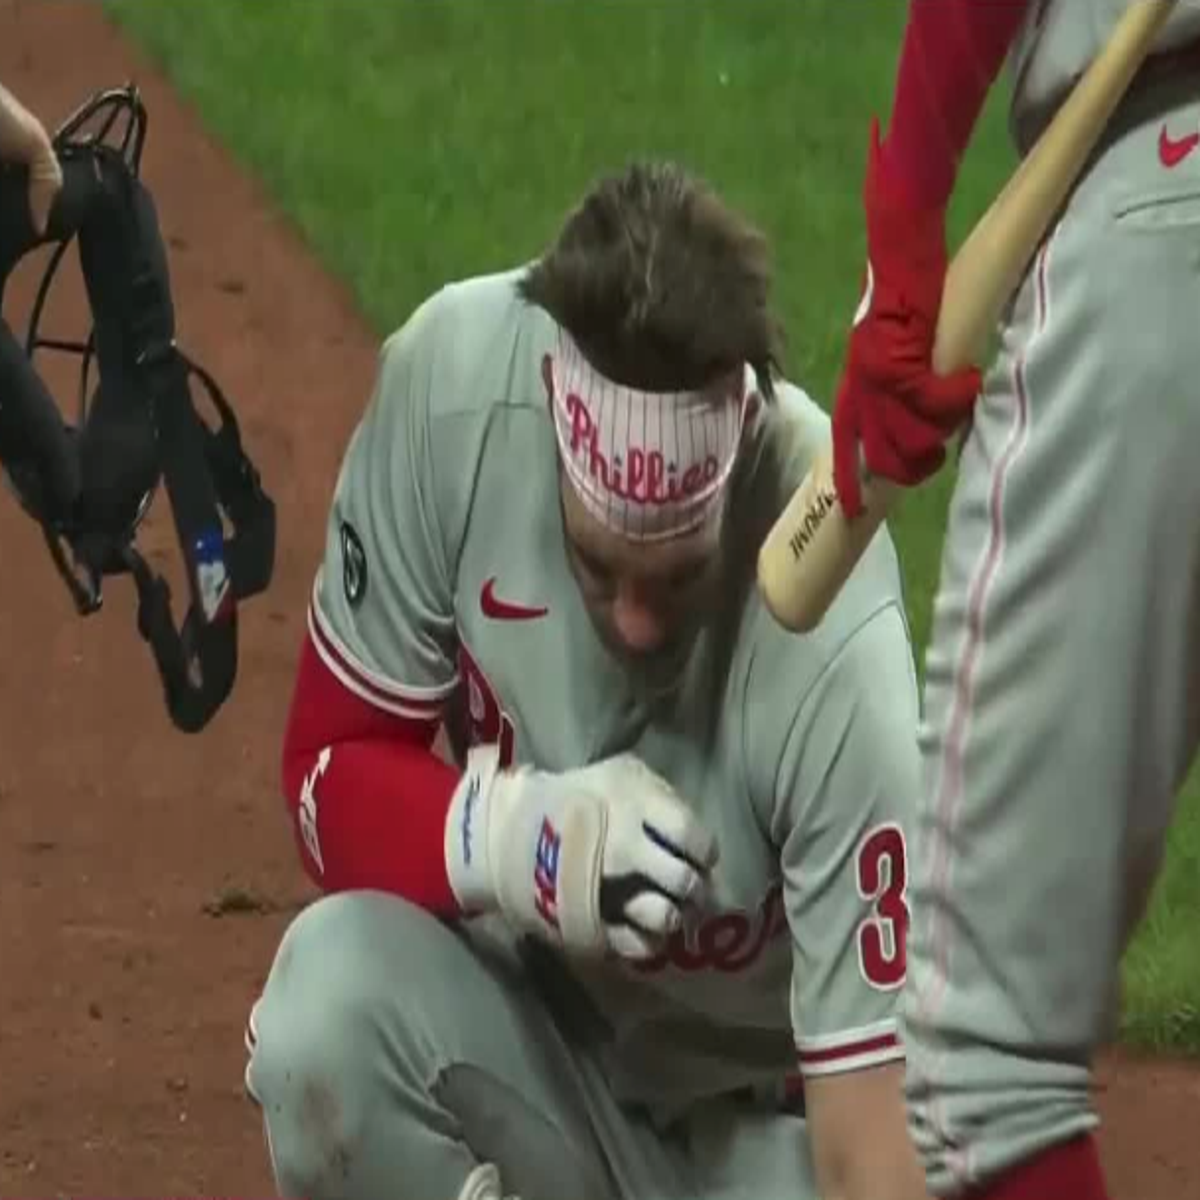 Phillies star Bryce Harper 'feels good' after taking 97 mph pitch to face